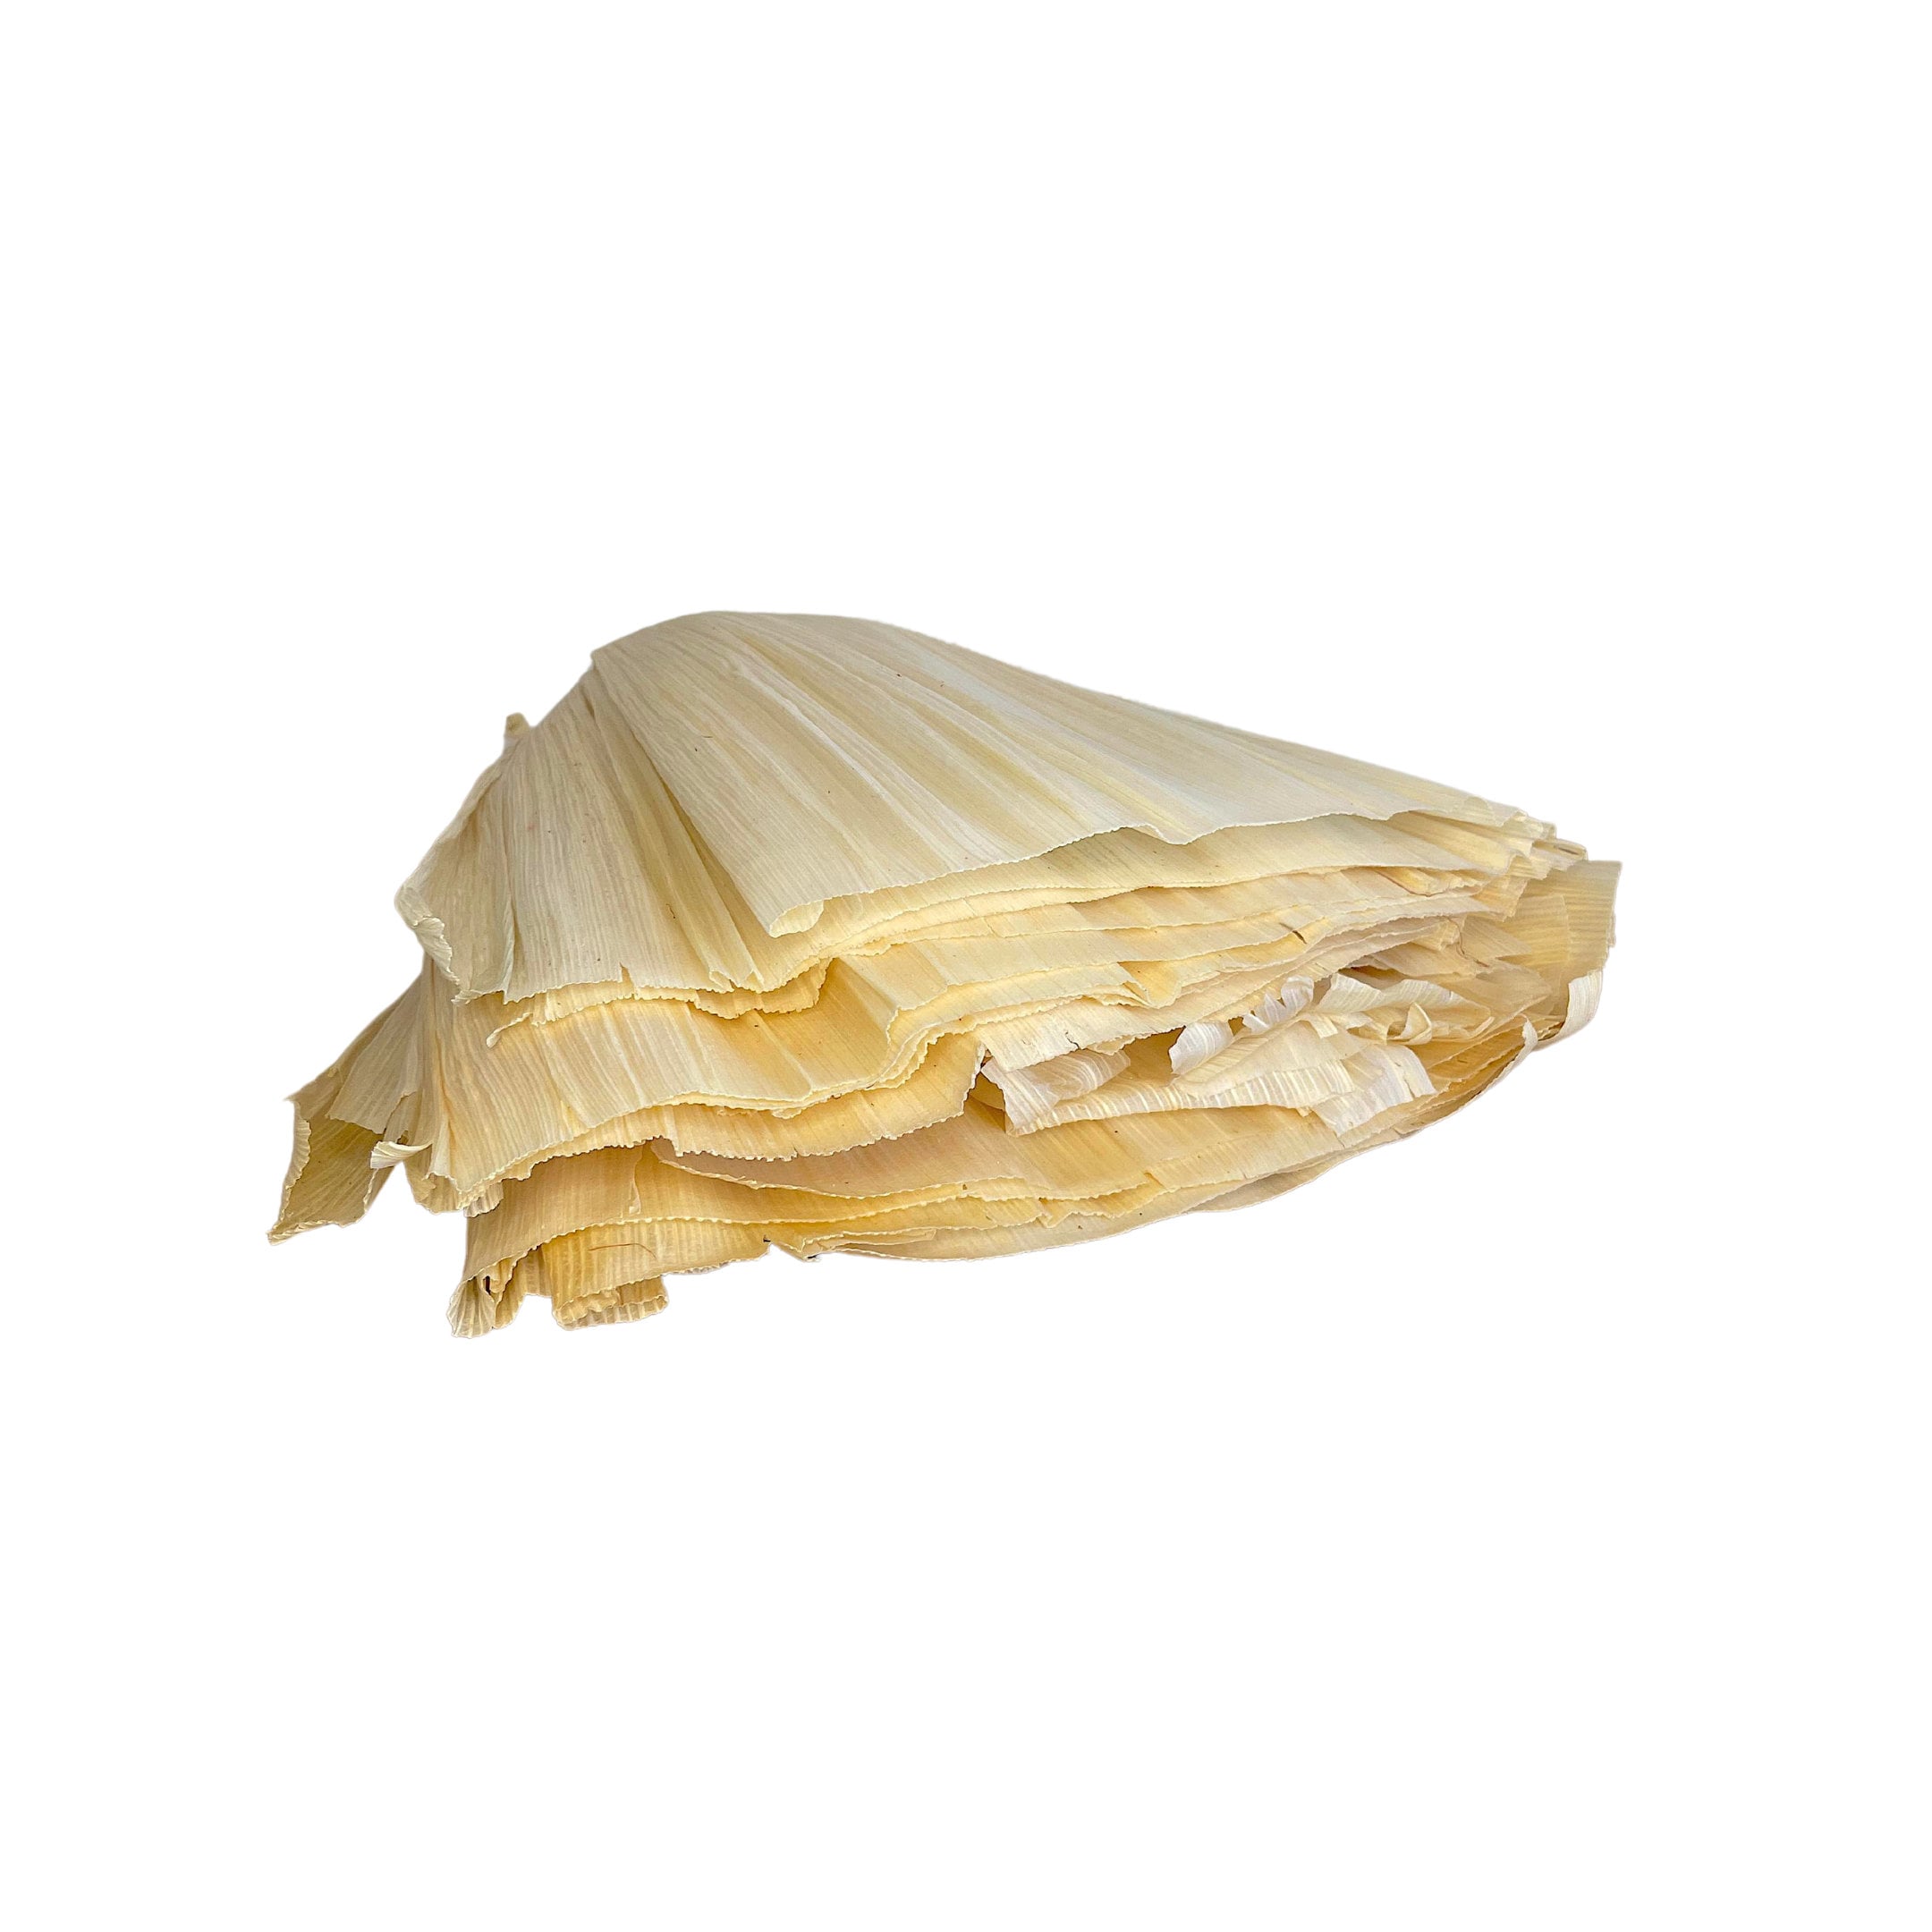 Dried Corn Husks for Tamales